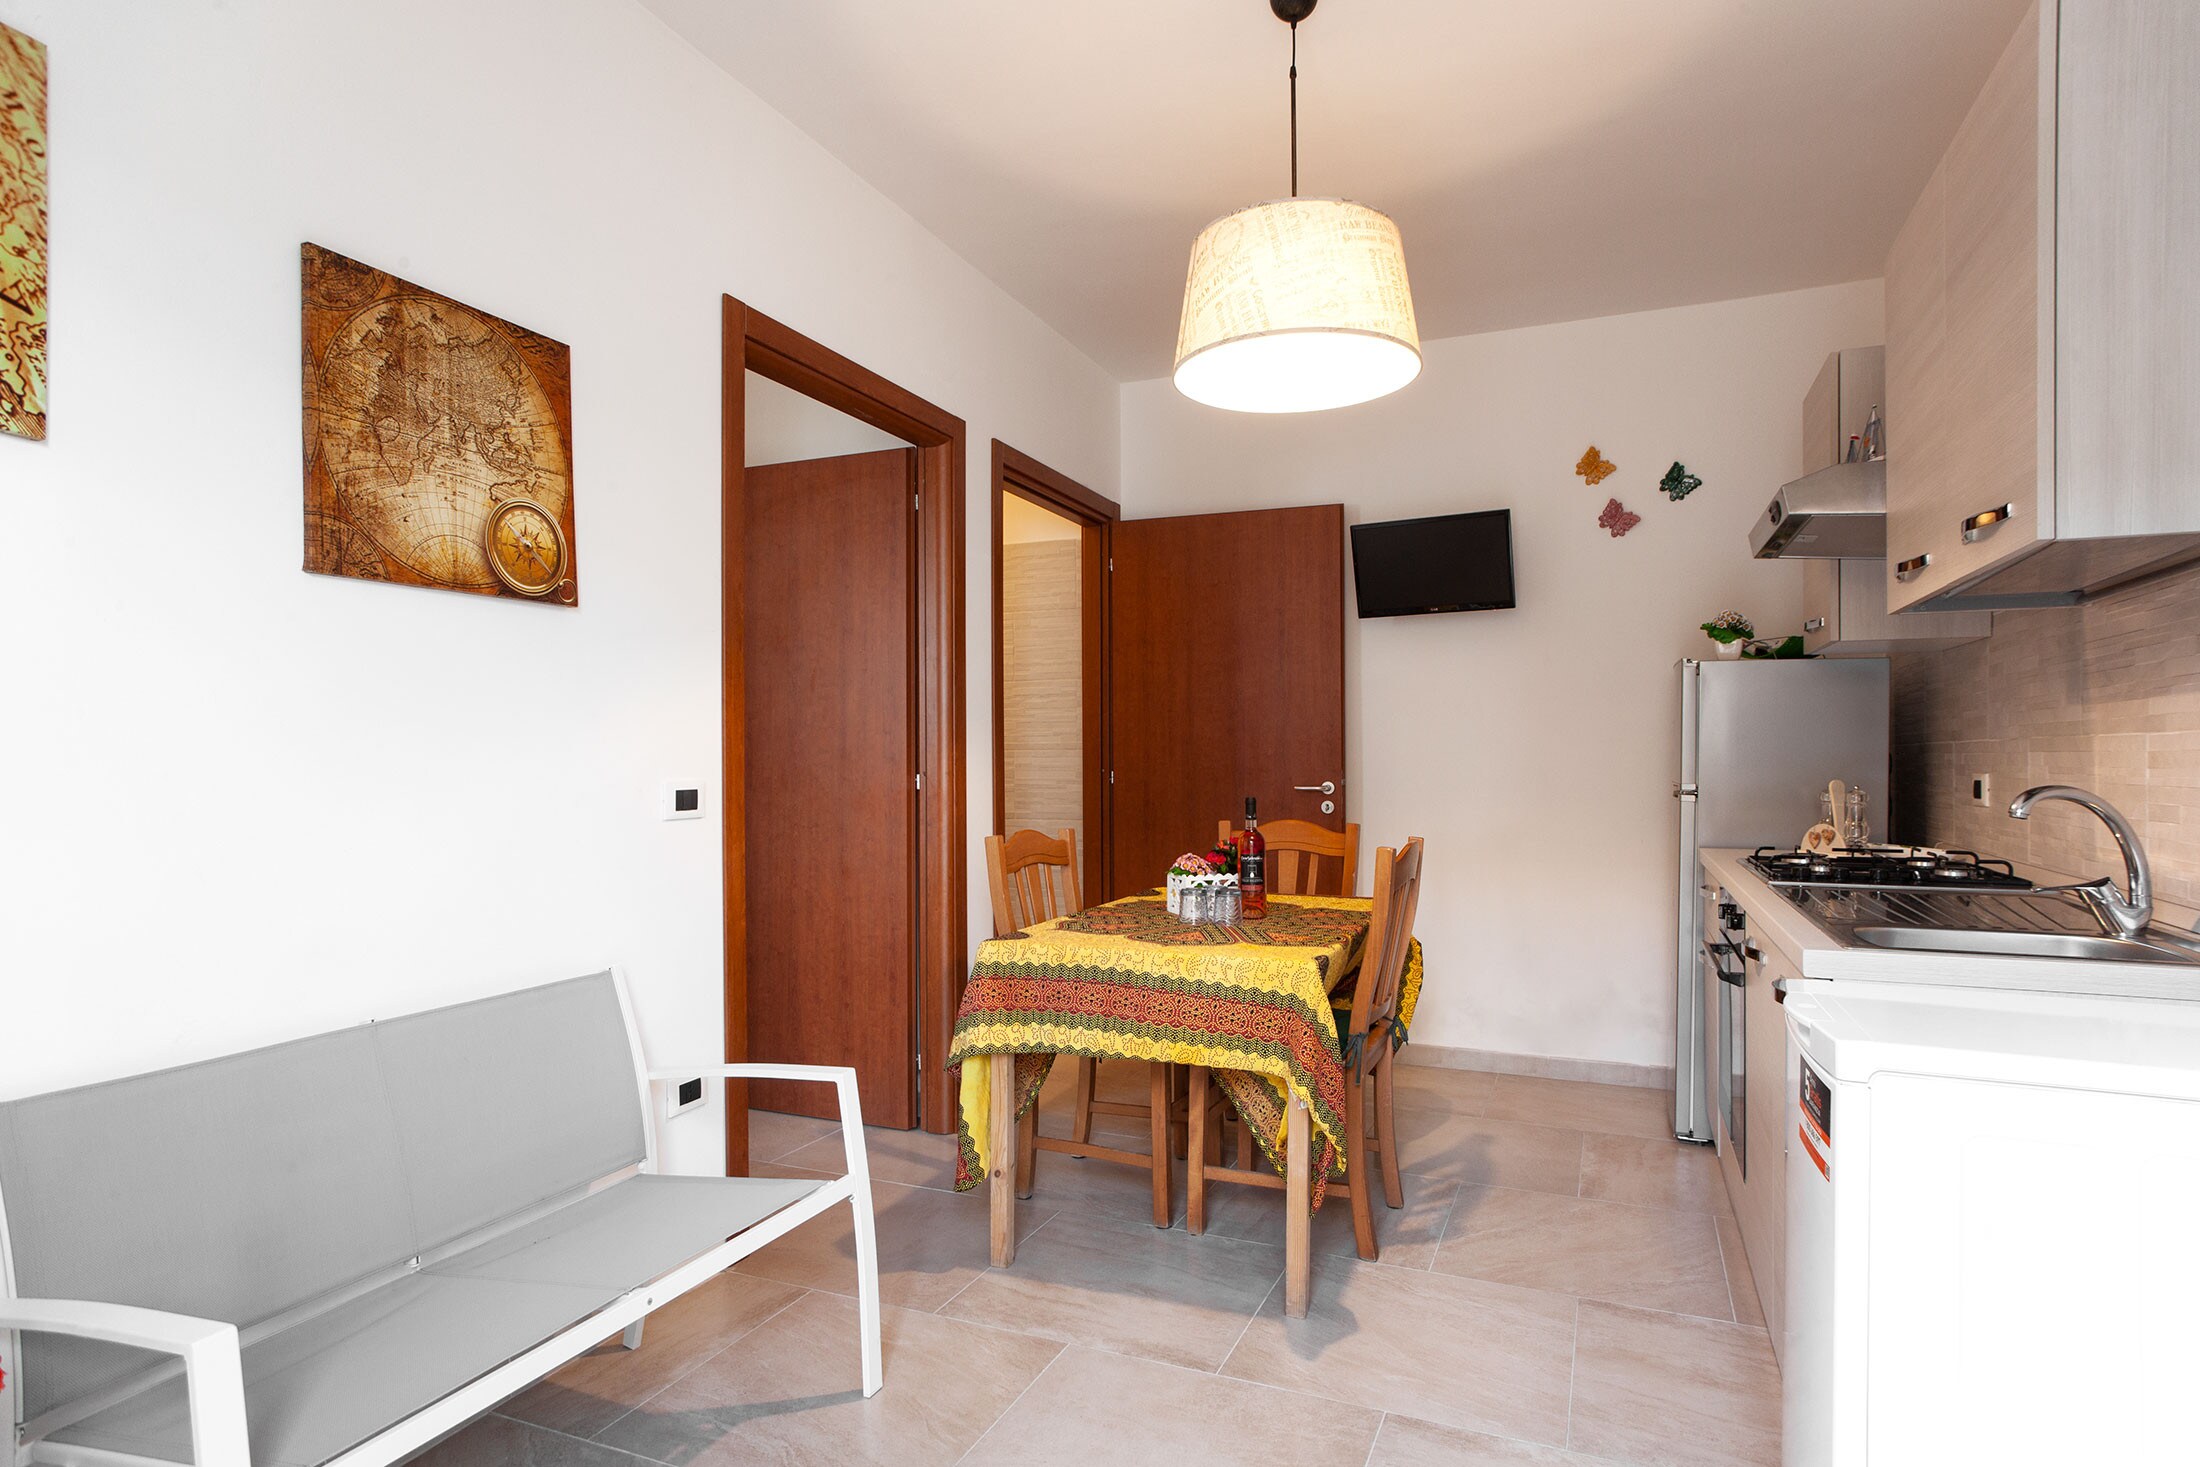 Property Image 2 - Good value one-bedroom flat 2-4 guests very close to the beach Sant’Isidoro m528